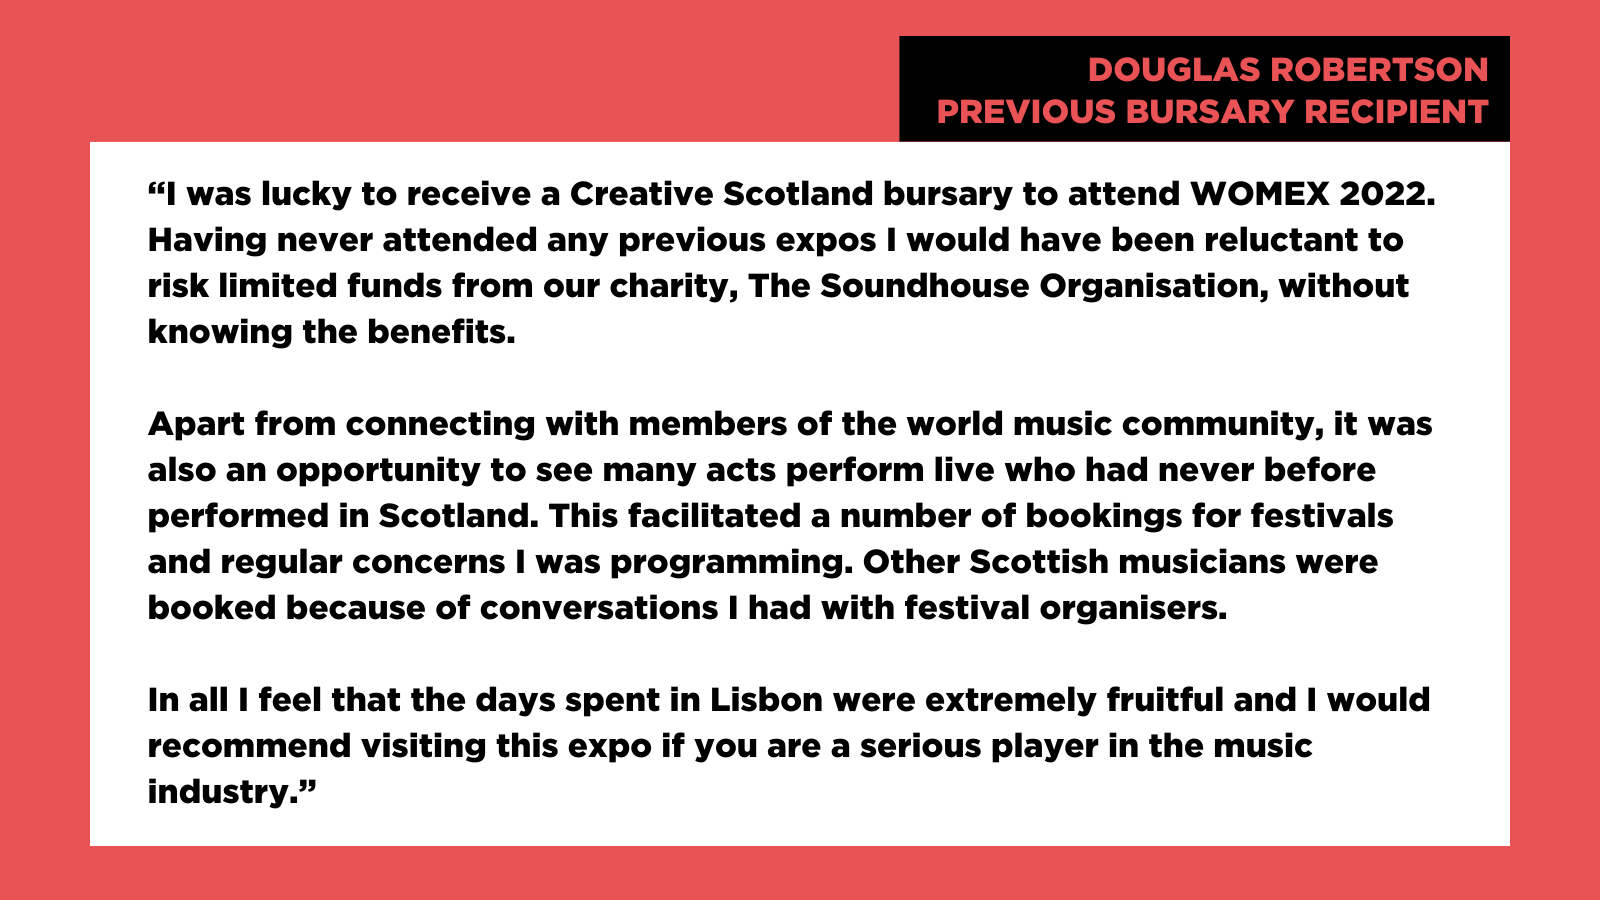 "I was lucky to receive a Creative Scotland bursary to attend WOMEX 2022. Having never attended any previous expos I would have been reluctant to risk limited funds from our charity, The Soundhouse Organisation, without knowing the benefits. Apart from connecting with members of the world music community, it was also an opportunity to see many acts perform live who had never before performed in Scotland. This facilitated a number of bookings for festivals and regular concerns I was programming. Other Scottish musicians were booked because of conversations I had with festival organisers. In all I feel that the days spent in Lisbon were extremely fruitful and I would recommend visiting this expo if you are a serious player in the music industry." Douglas Robertson